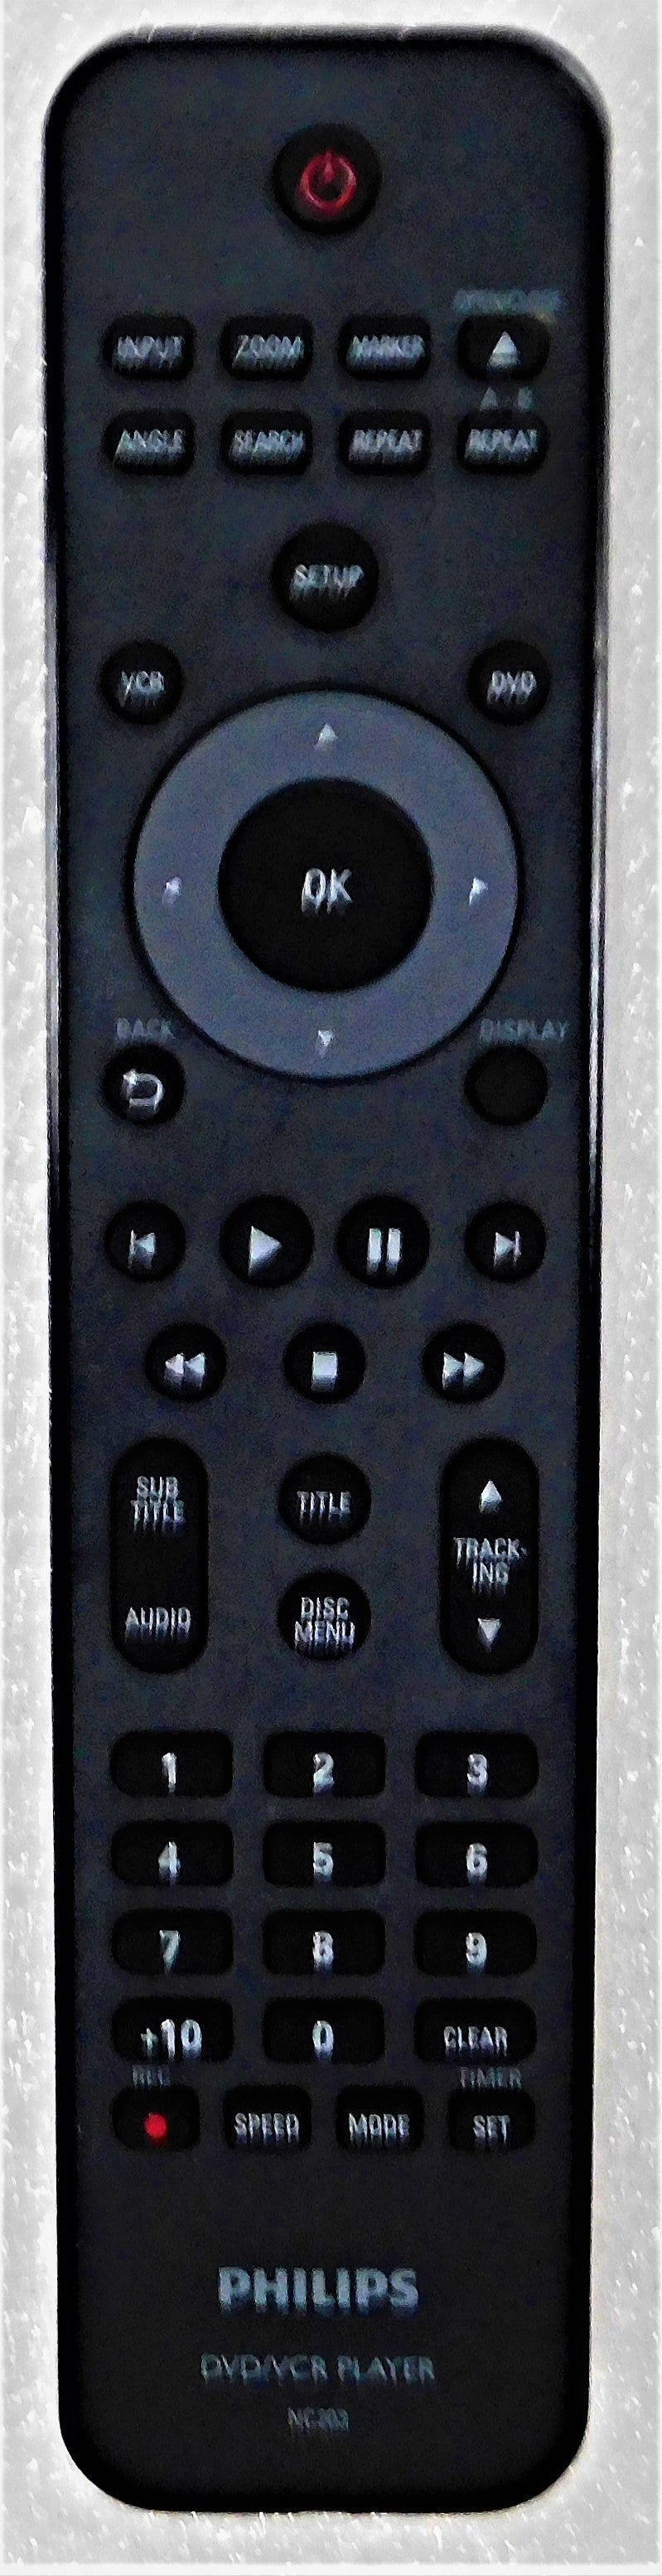 Original OEM replacement remote control for Philips DVD/VCR player NC203UH